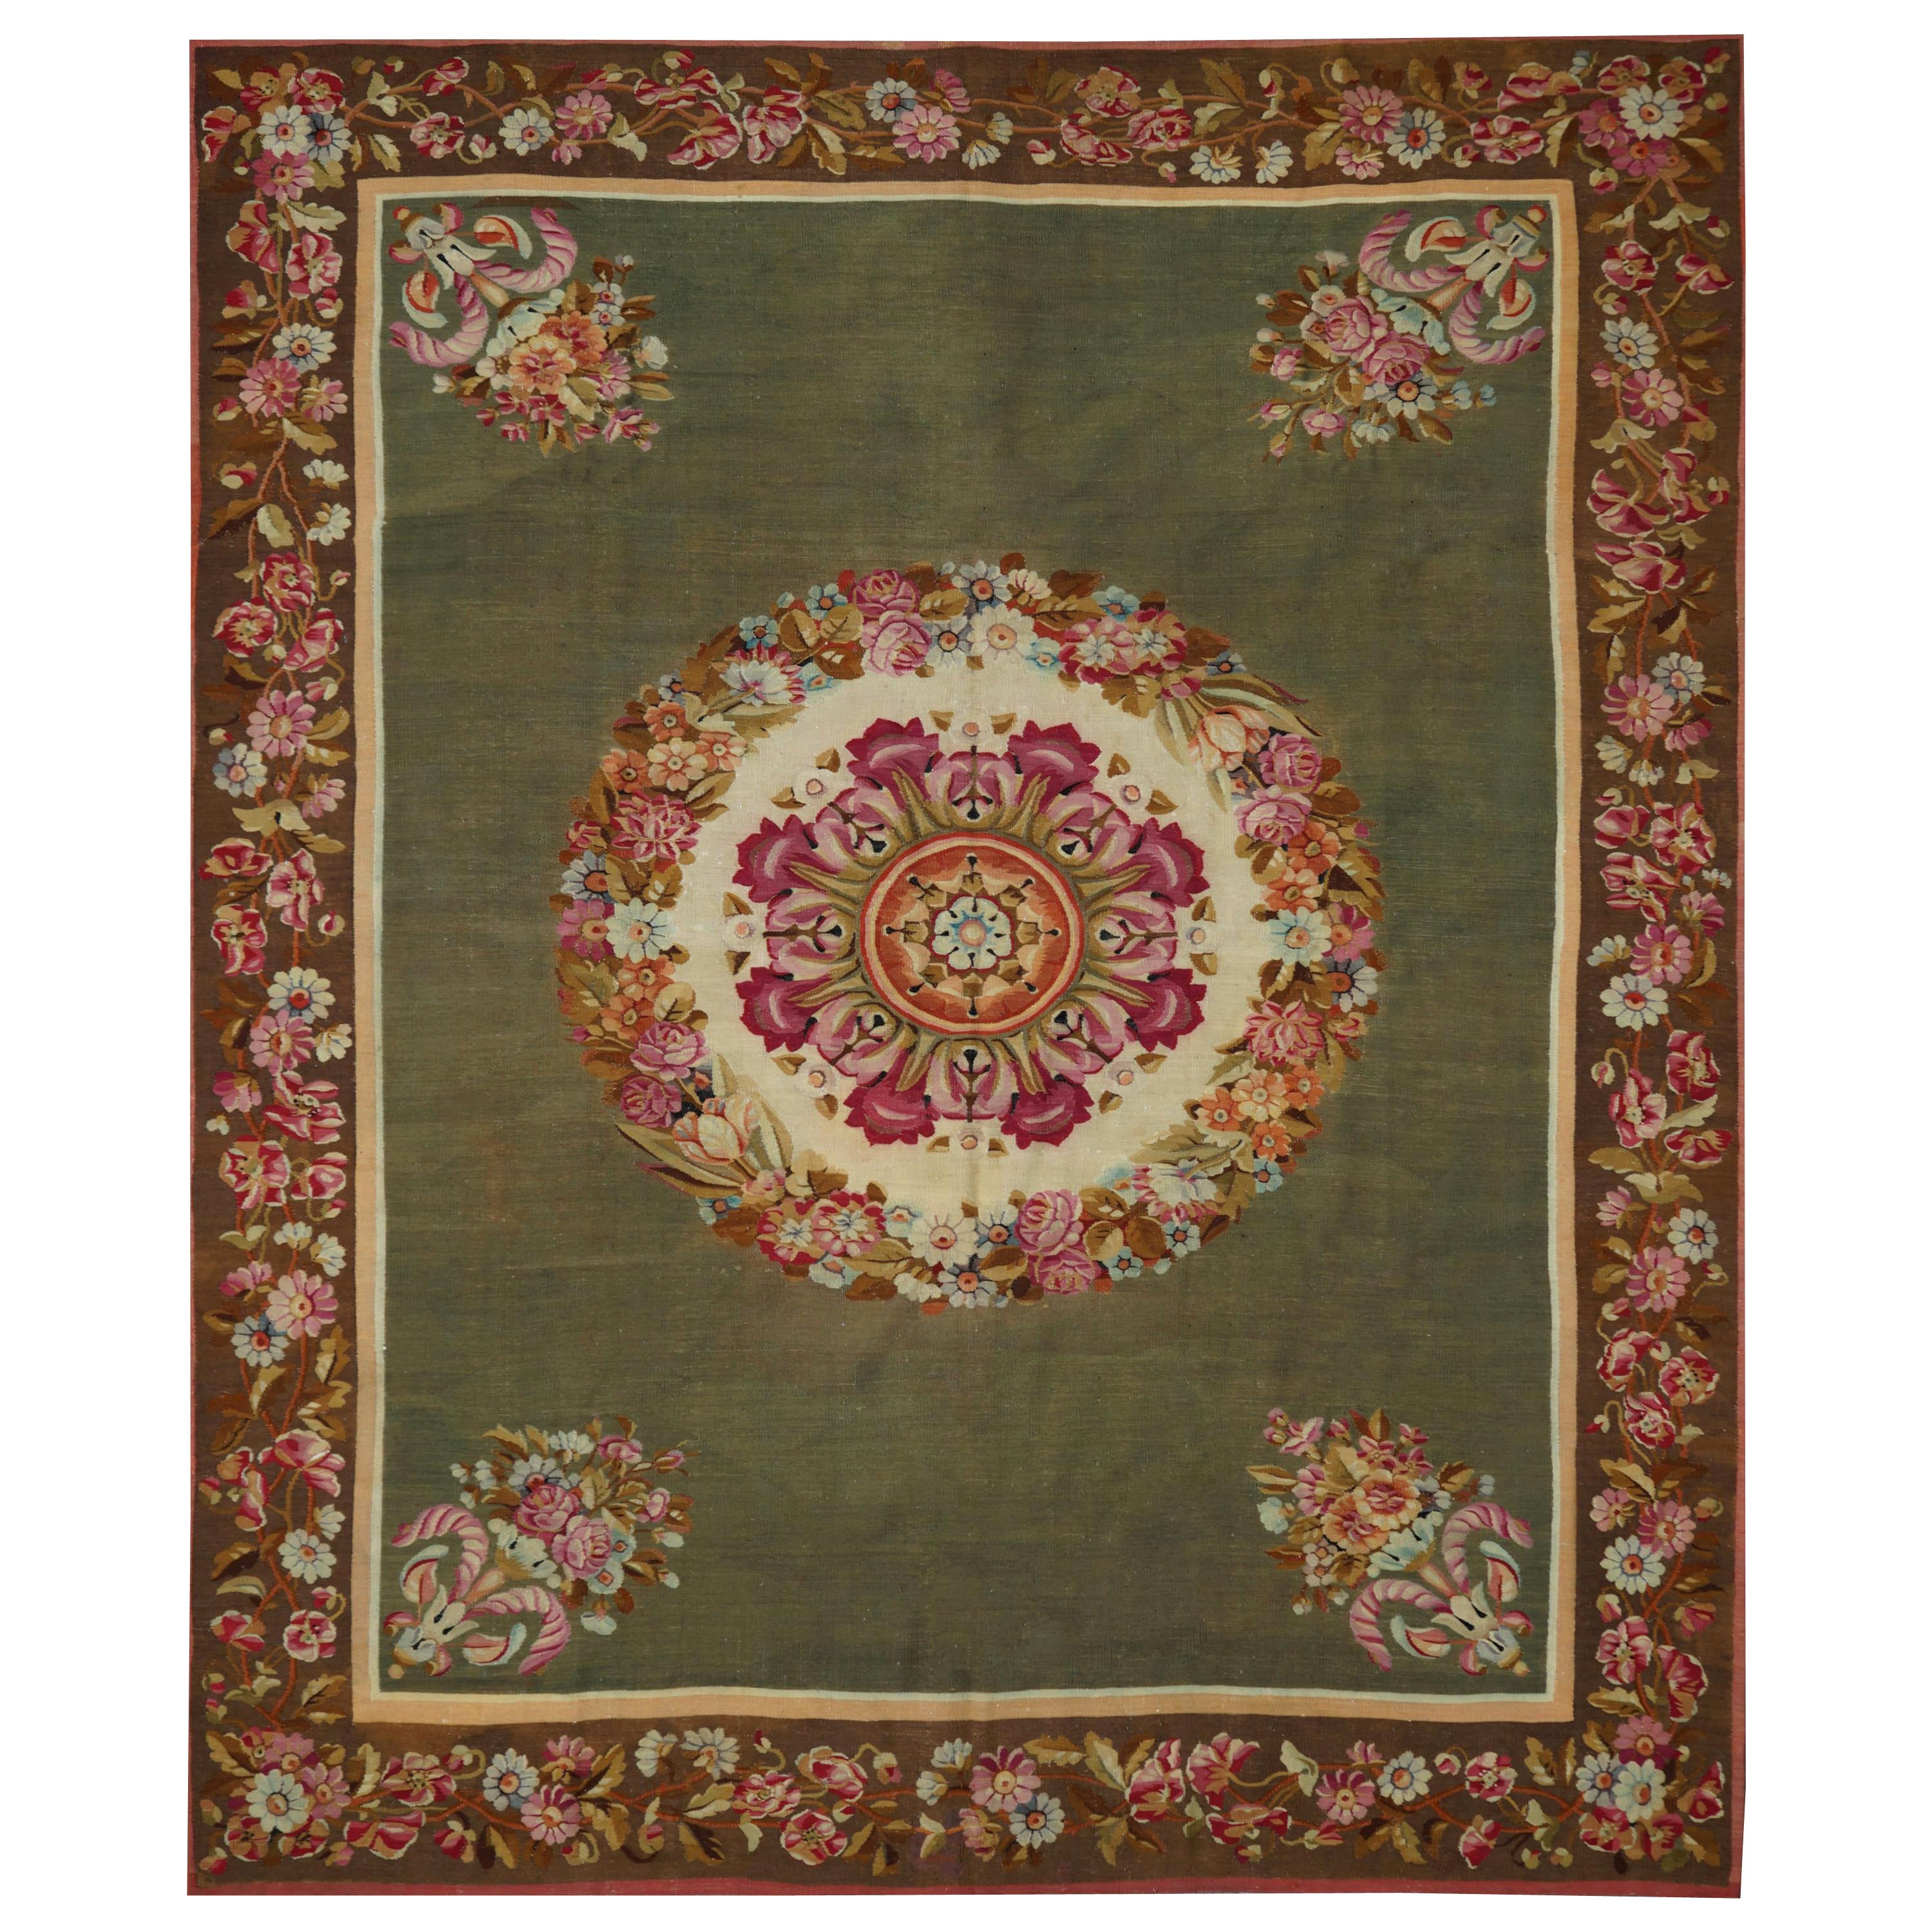 19th Century Handwoven Aubusson Rug, Green with Flowers